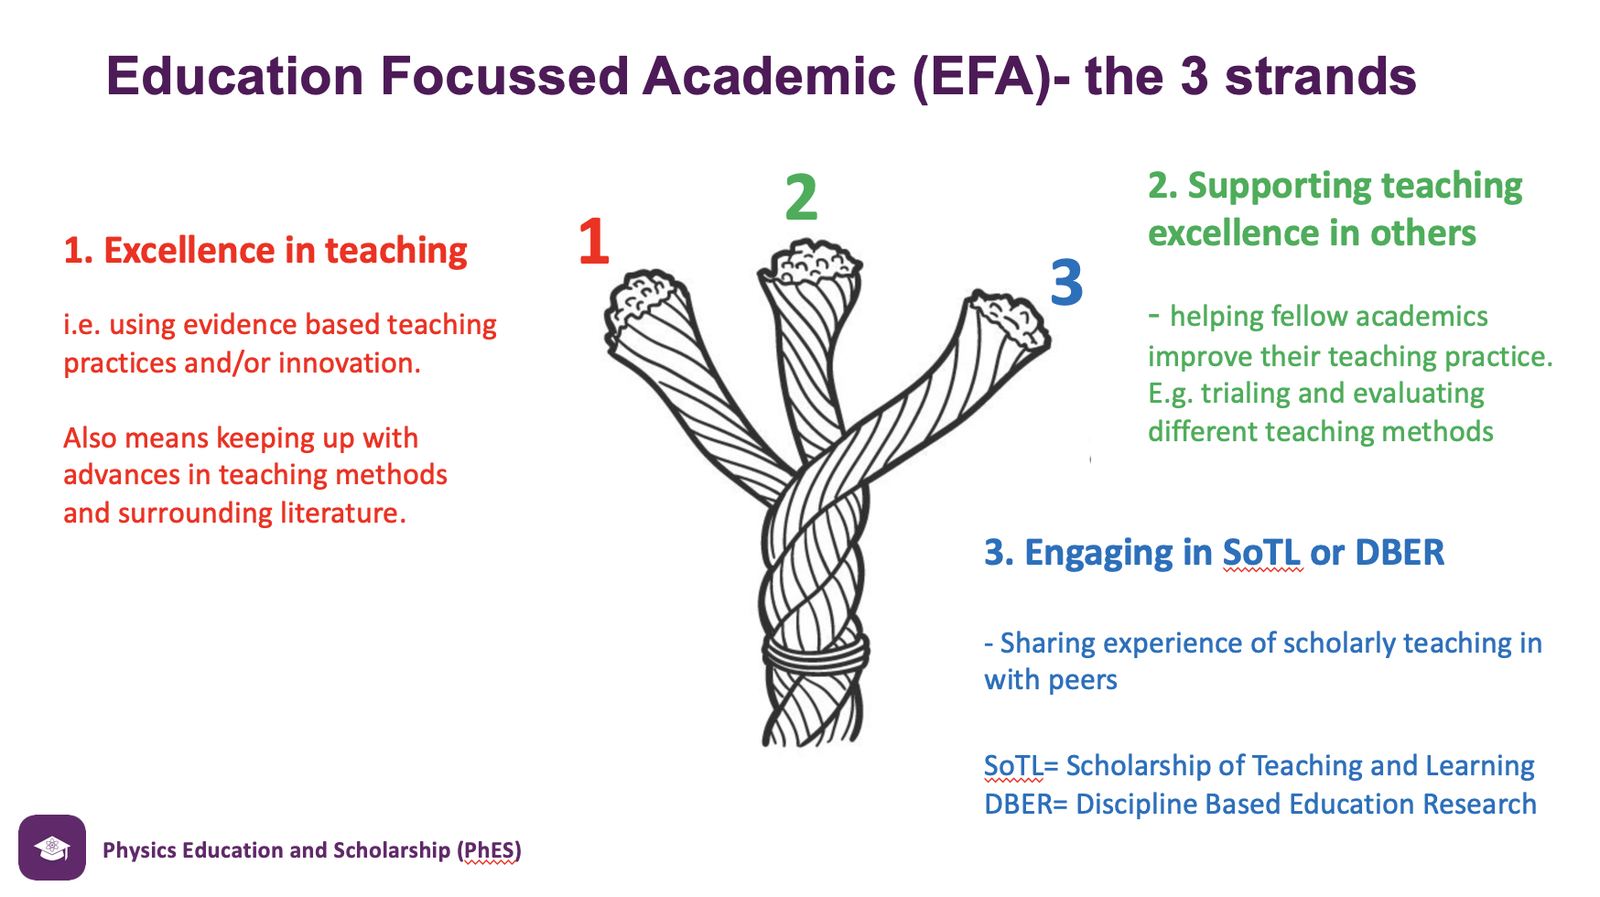 Graphic depicting the 3 strands of the Education Focussed Academic